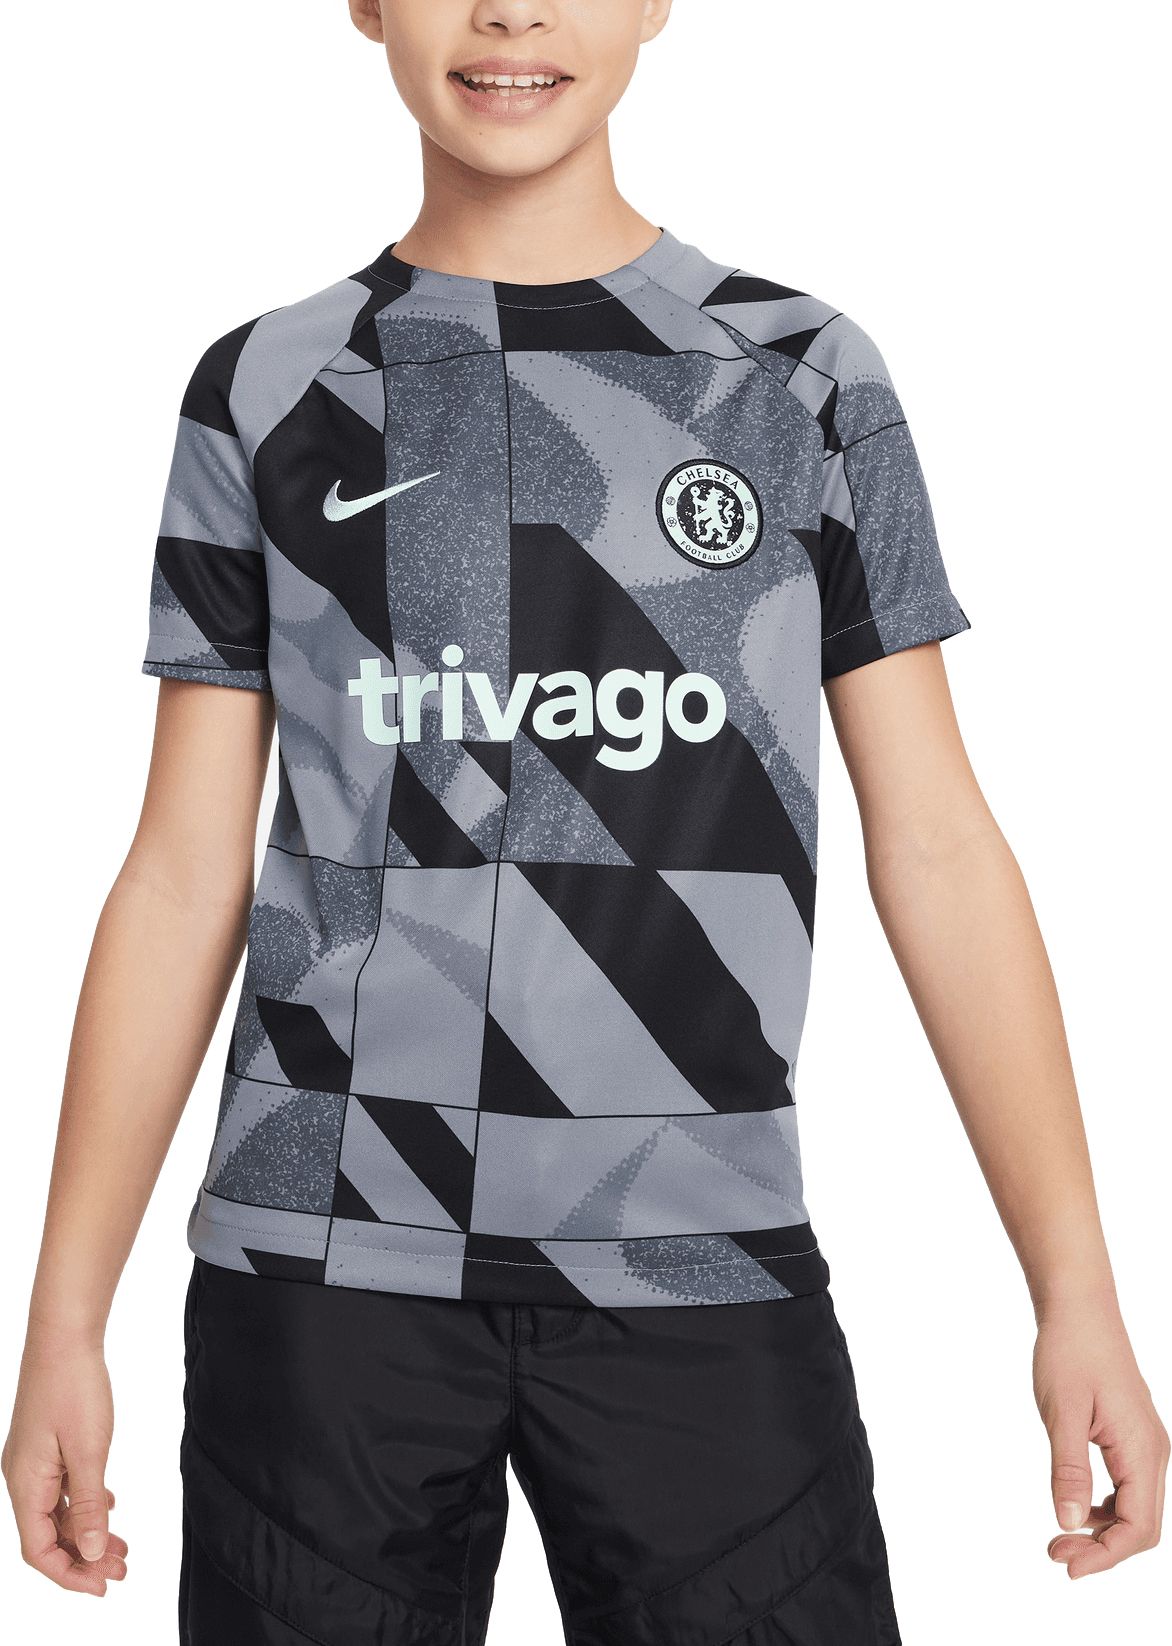 chelsea youth kit